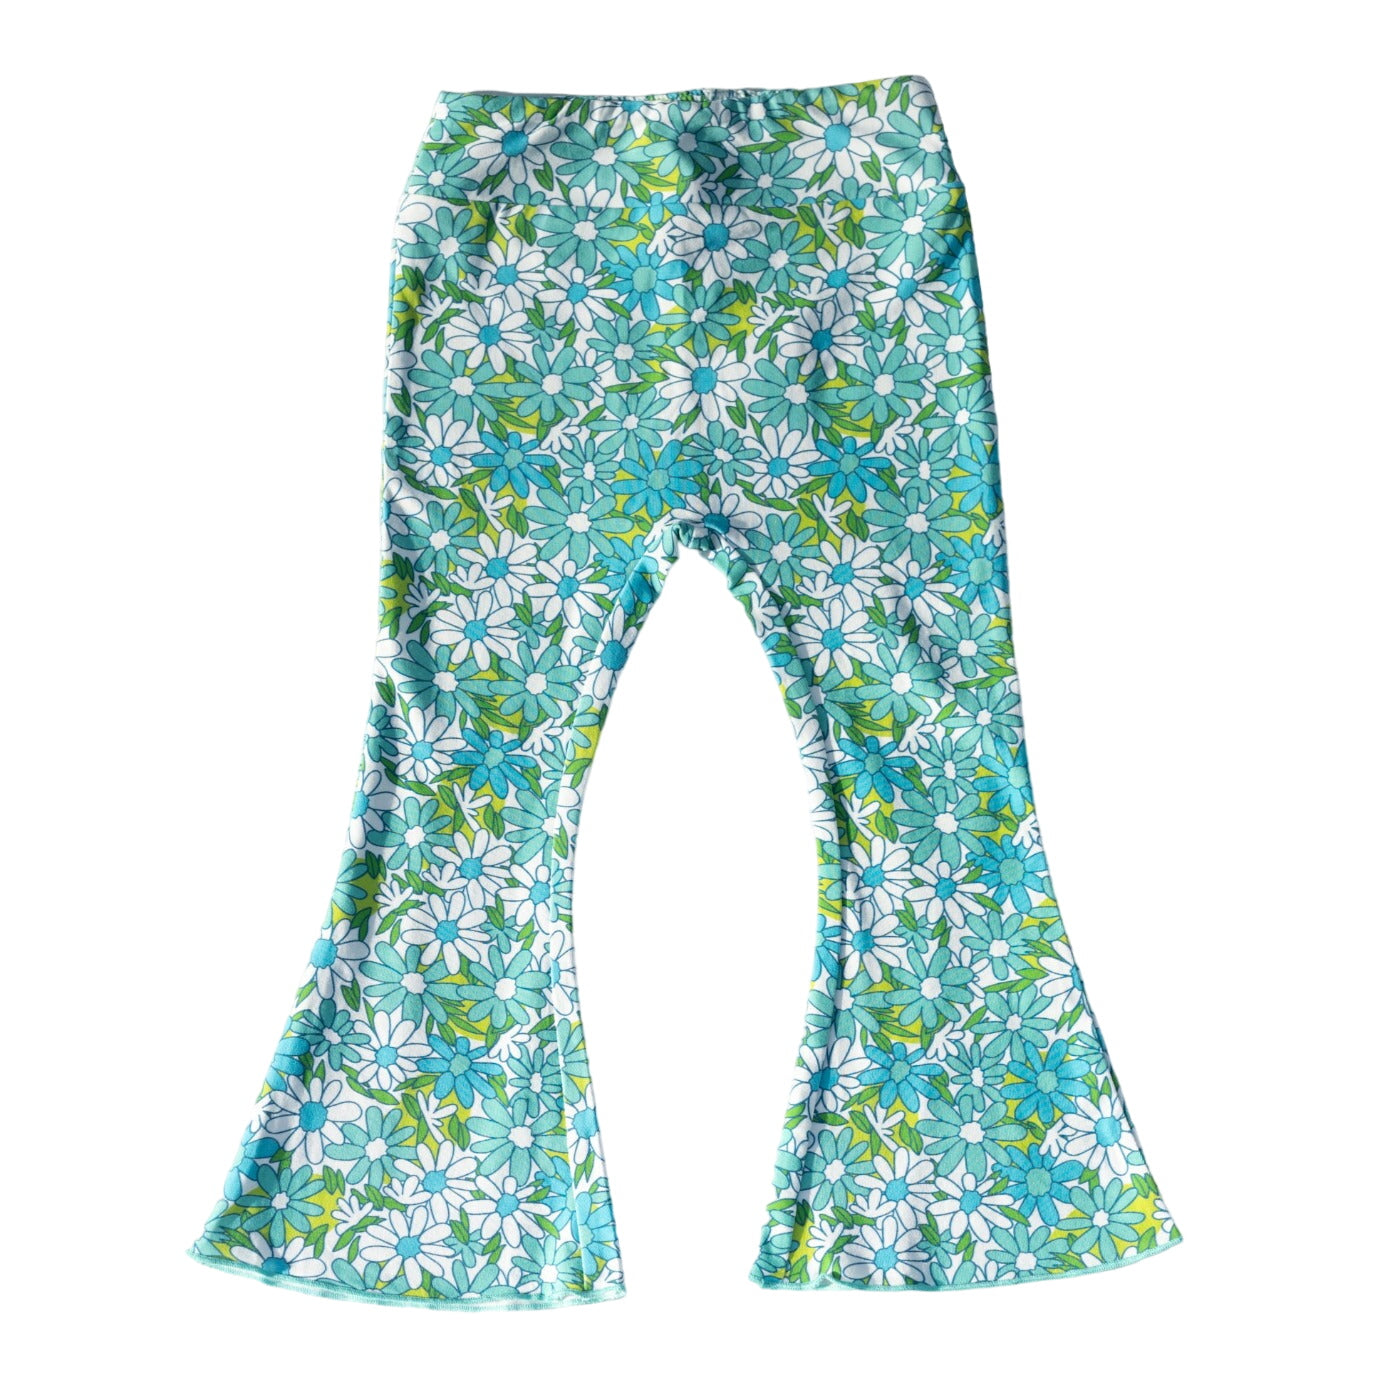 Blue Flower Power Jersey Knit Bell Bottoms For Babies, Toddlers And Girls